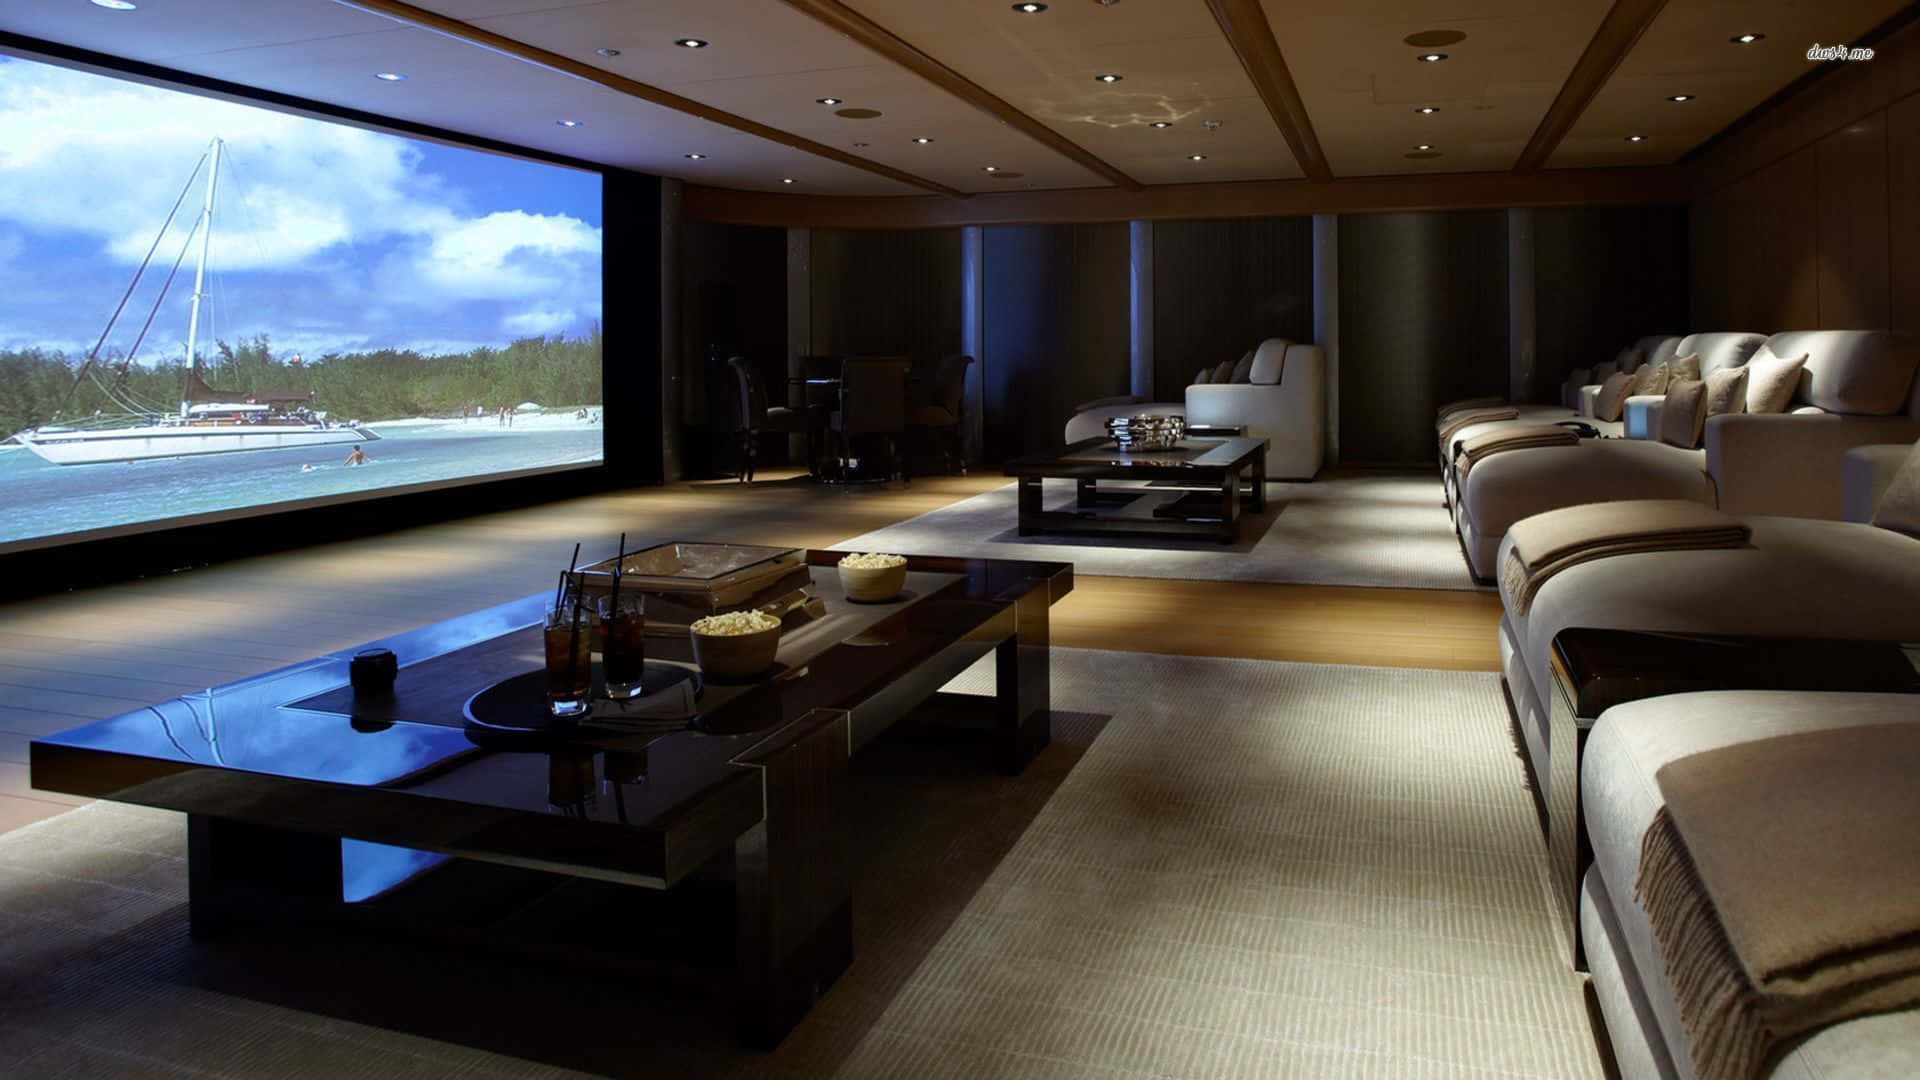 Entertain your family and friends with a luxurious home cinema setup. Wallpaper